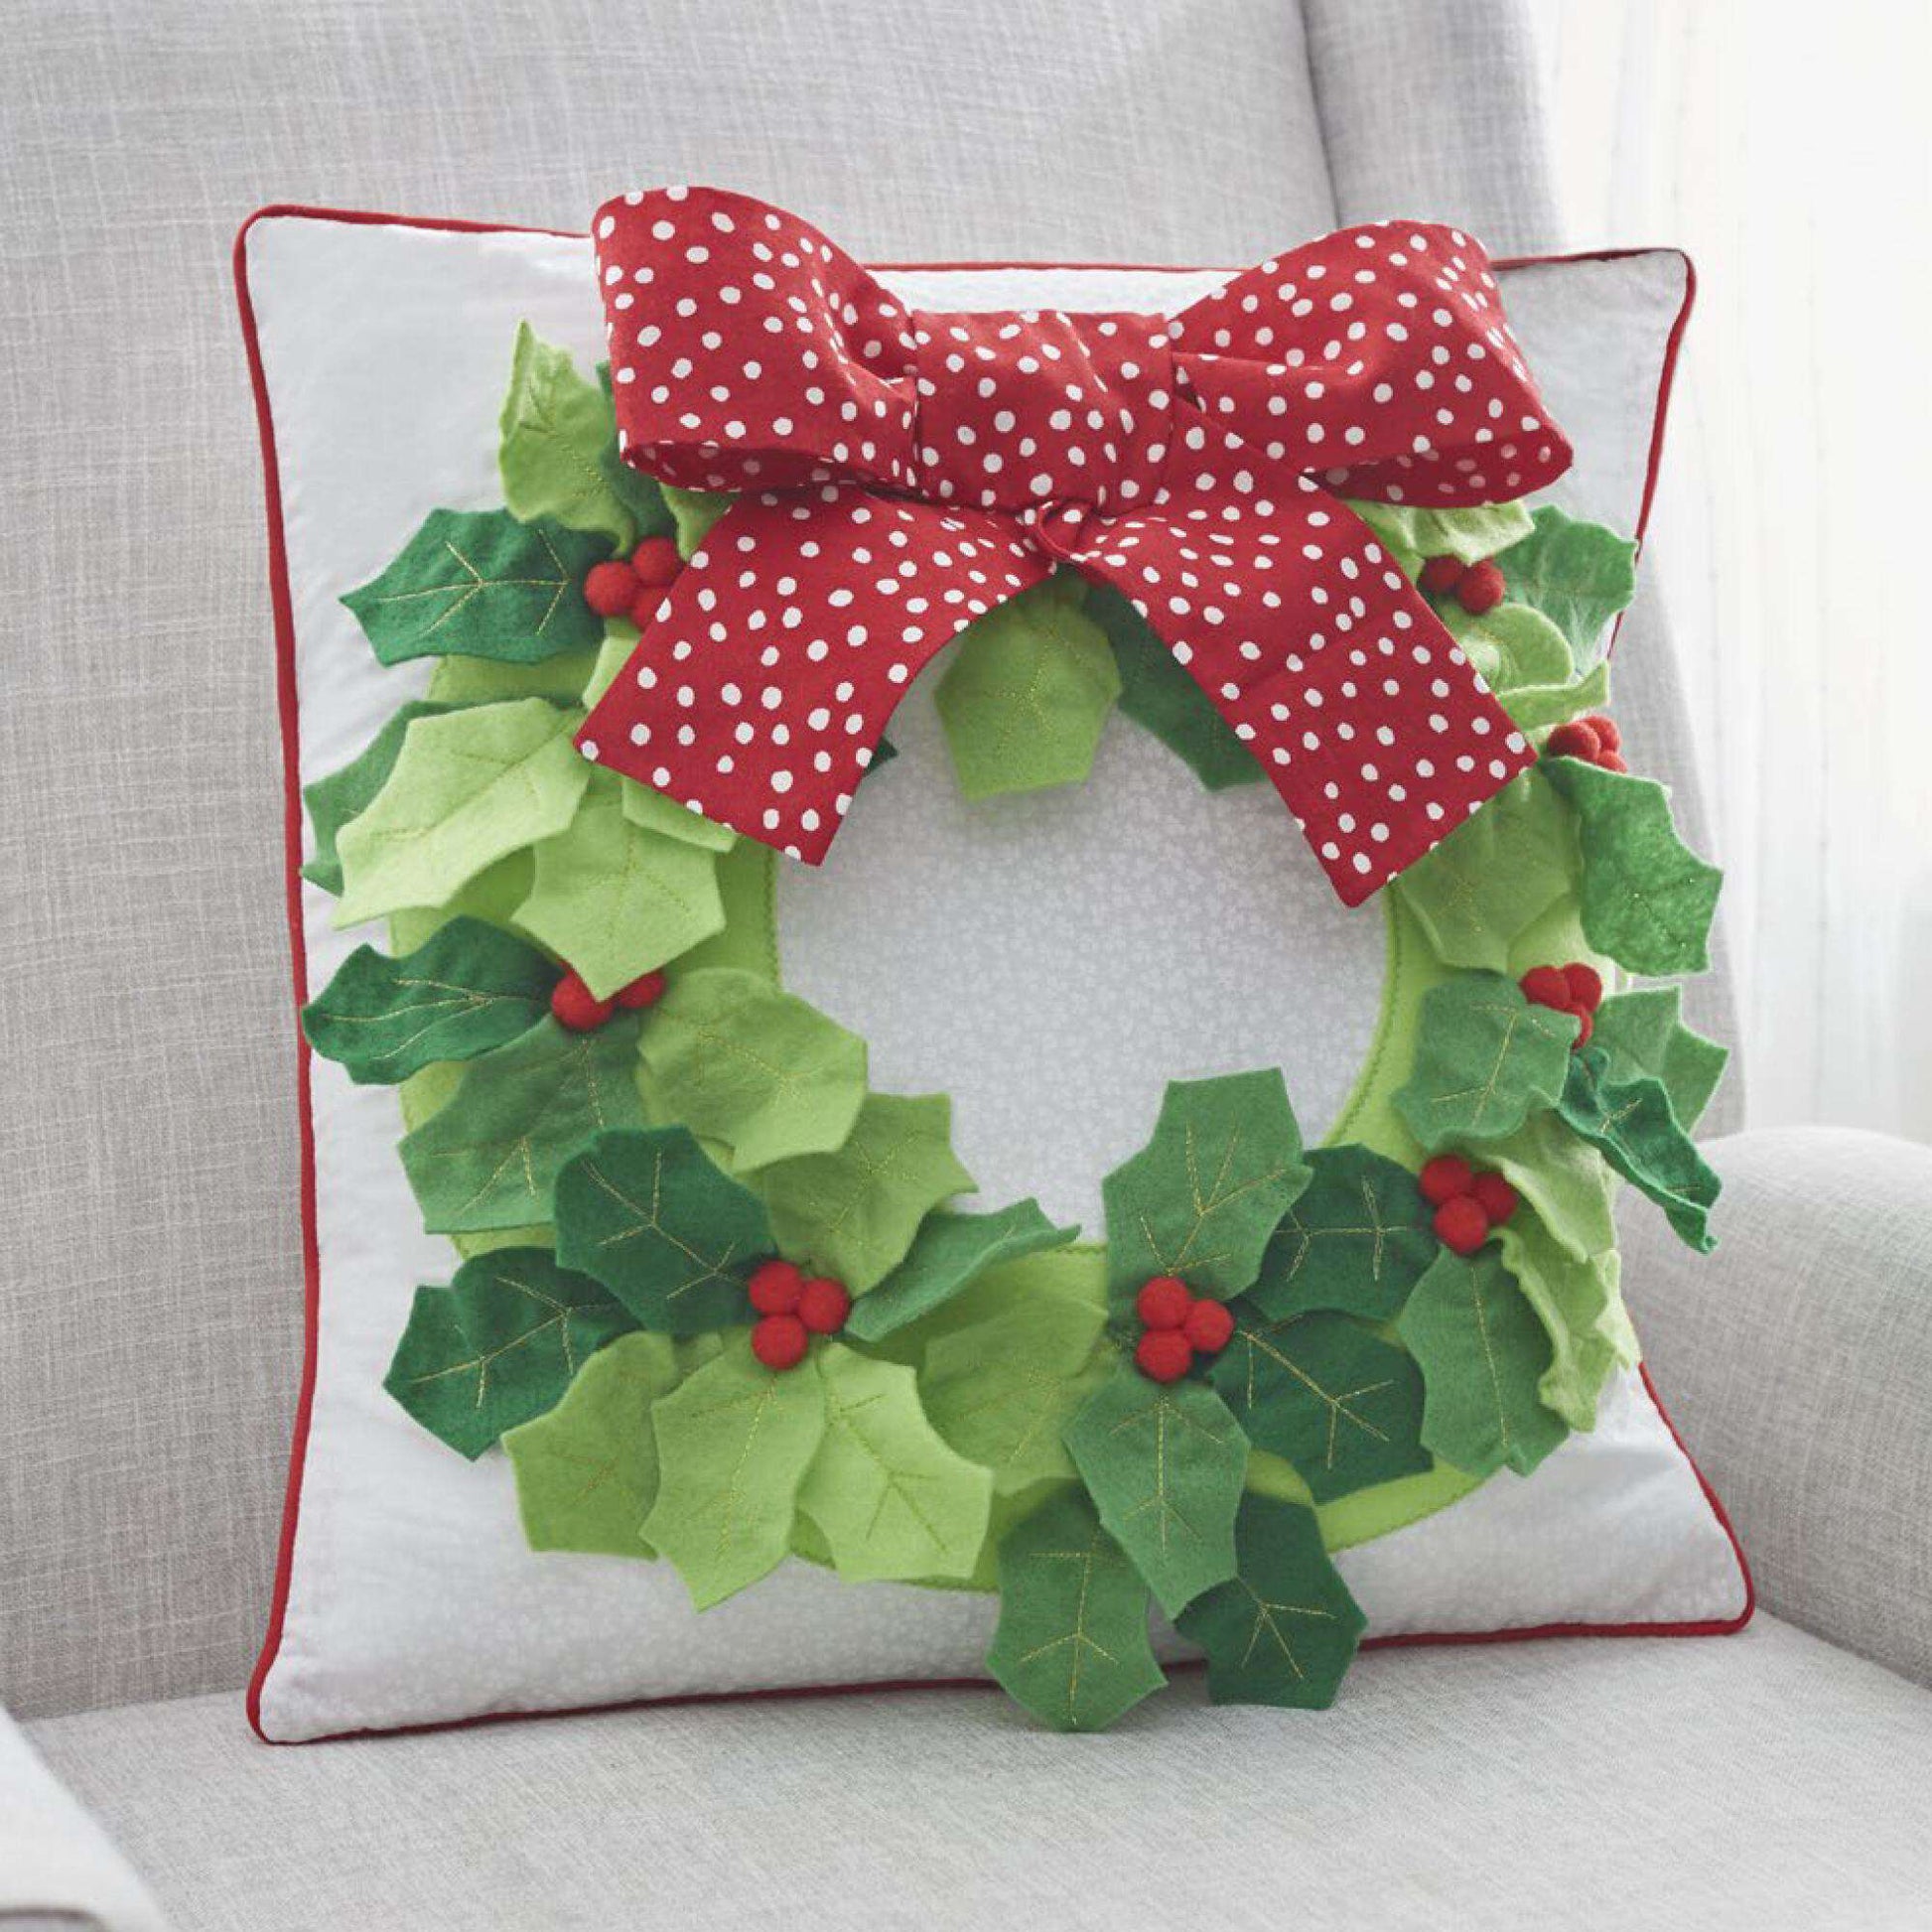 Free Coats & Clark Sewing Holly Wreath Pillow Pattern